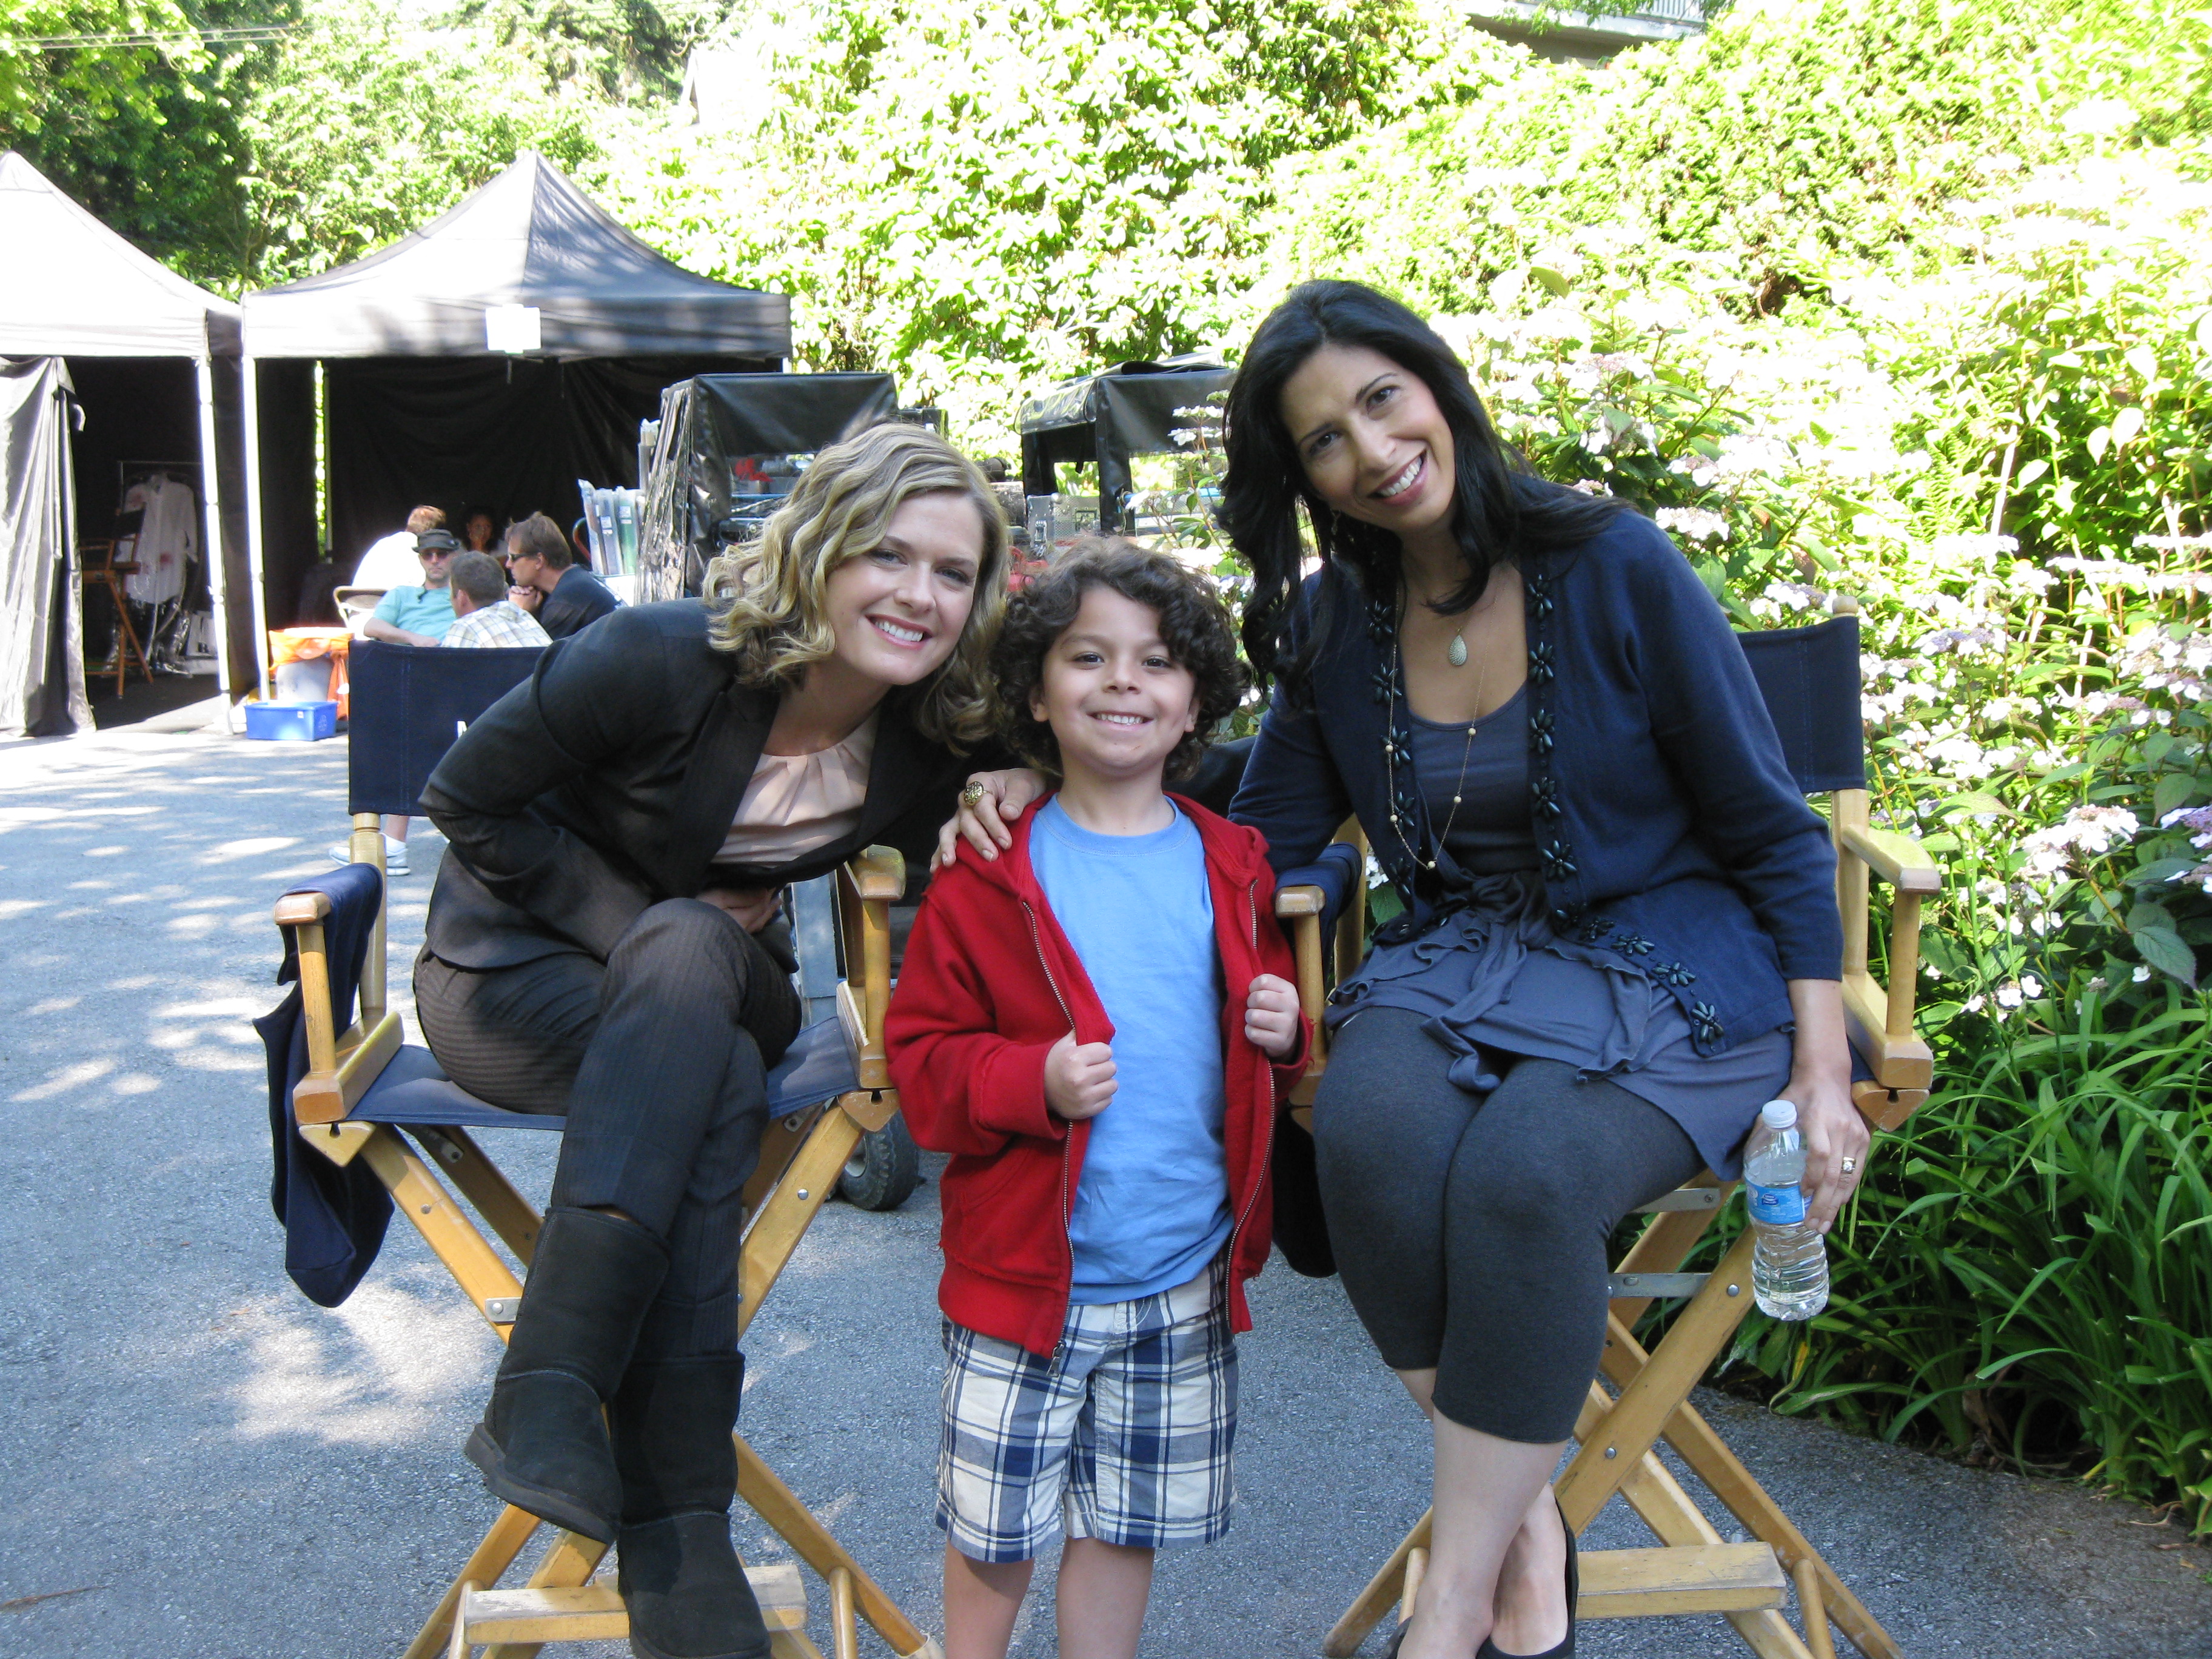 Bruce onset of Psych with Maggie Lawson & Rose Abdoo